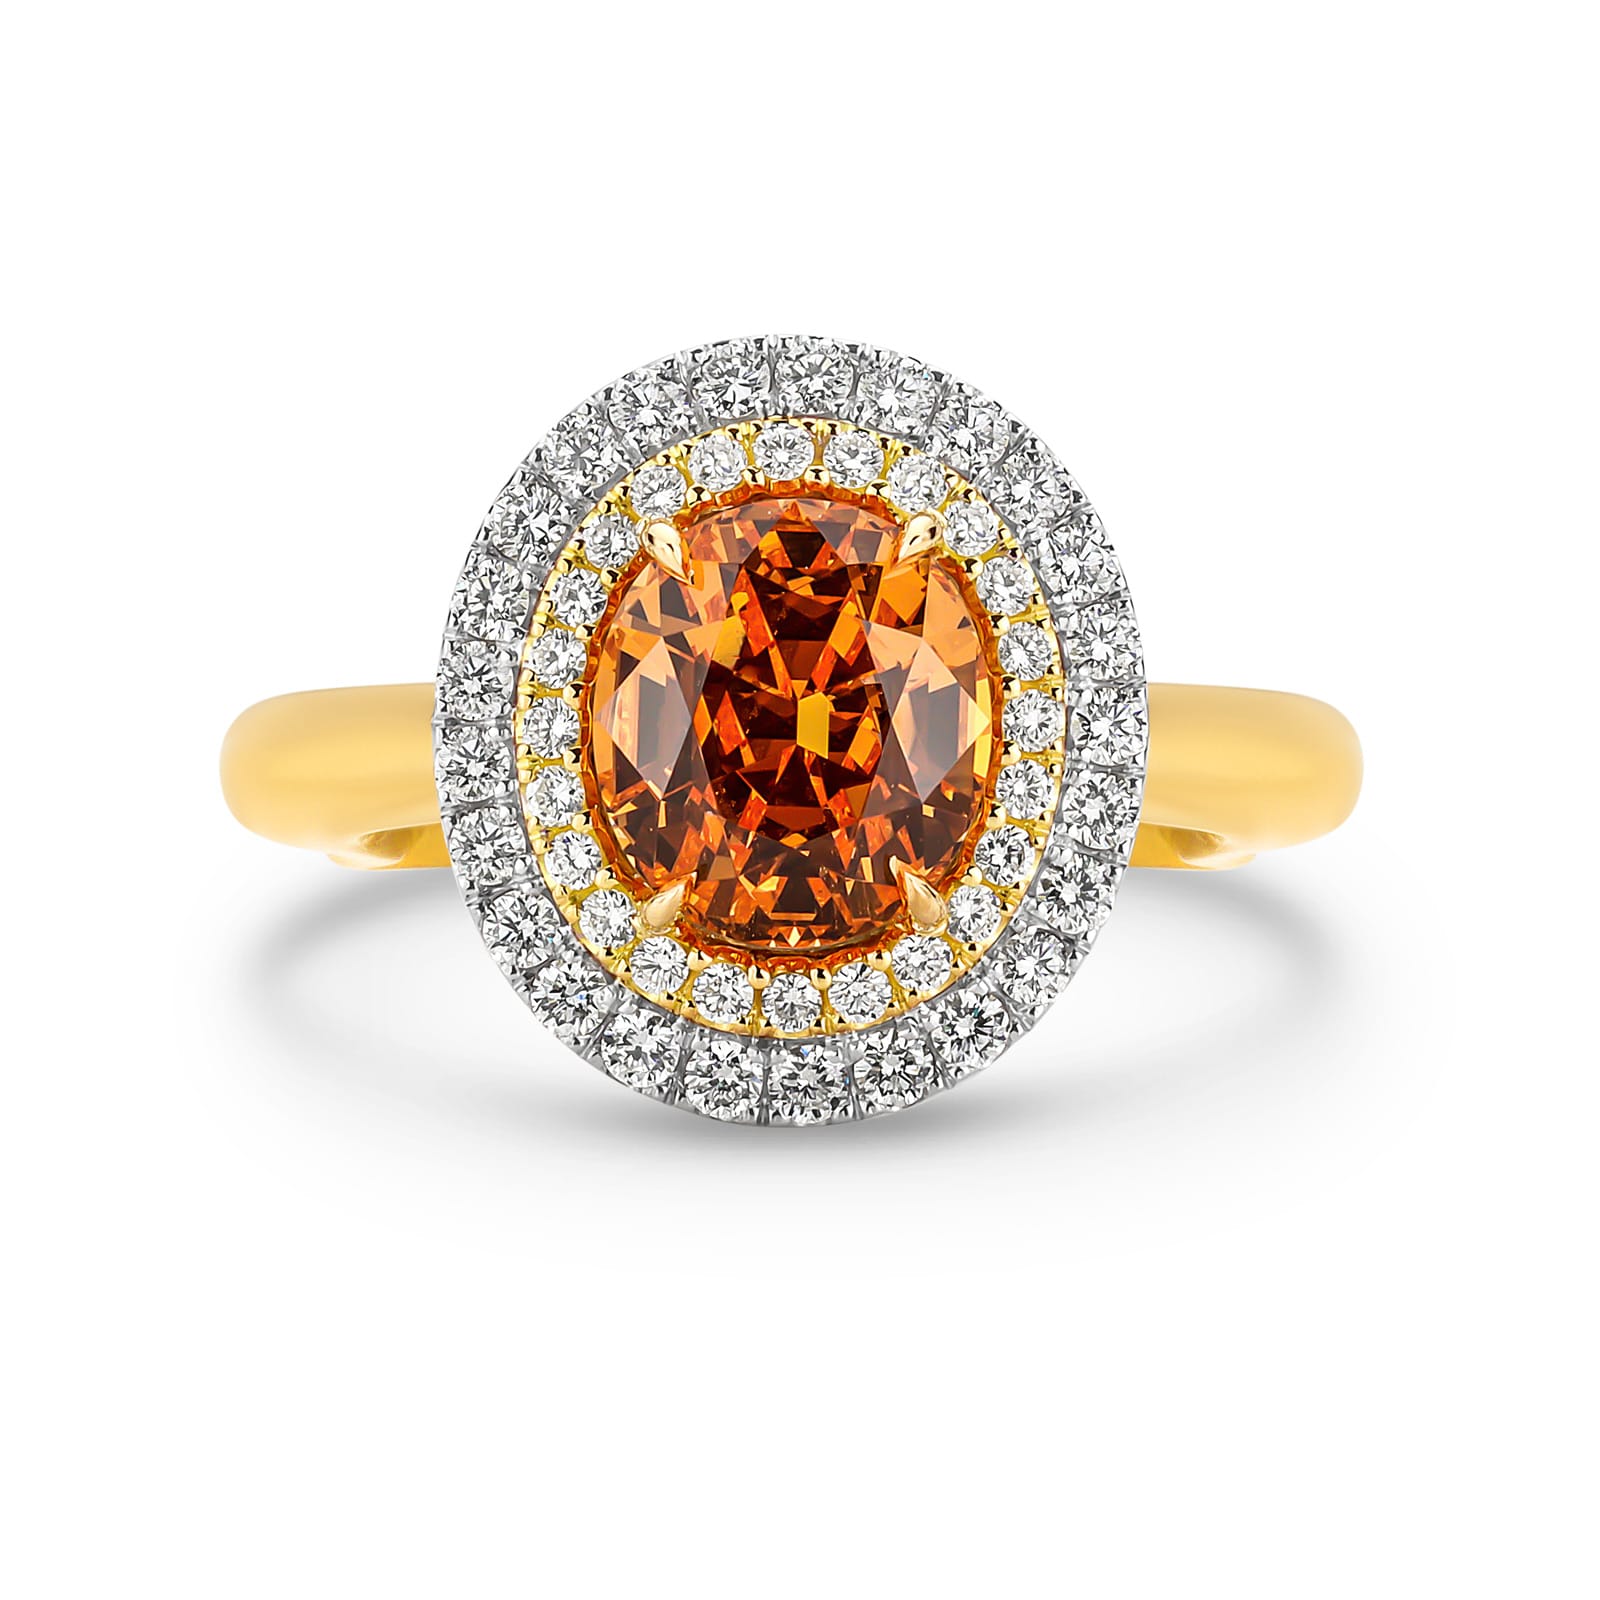 Aurelia features a rare 3.95 carat oval Mandarin garnet. Surrounding this centrepiece, Aurelia features a brilliant, gleaming double halo of white diamonds, crafted from 18 carat yellow and white gold. She was designed and handcrafted by LeGassick's Master Jewellers, Gold Coast, Australia.